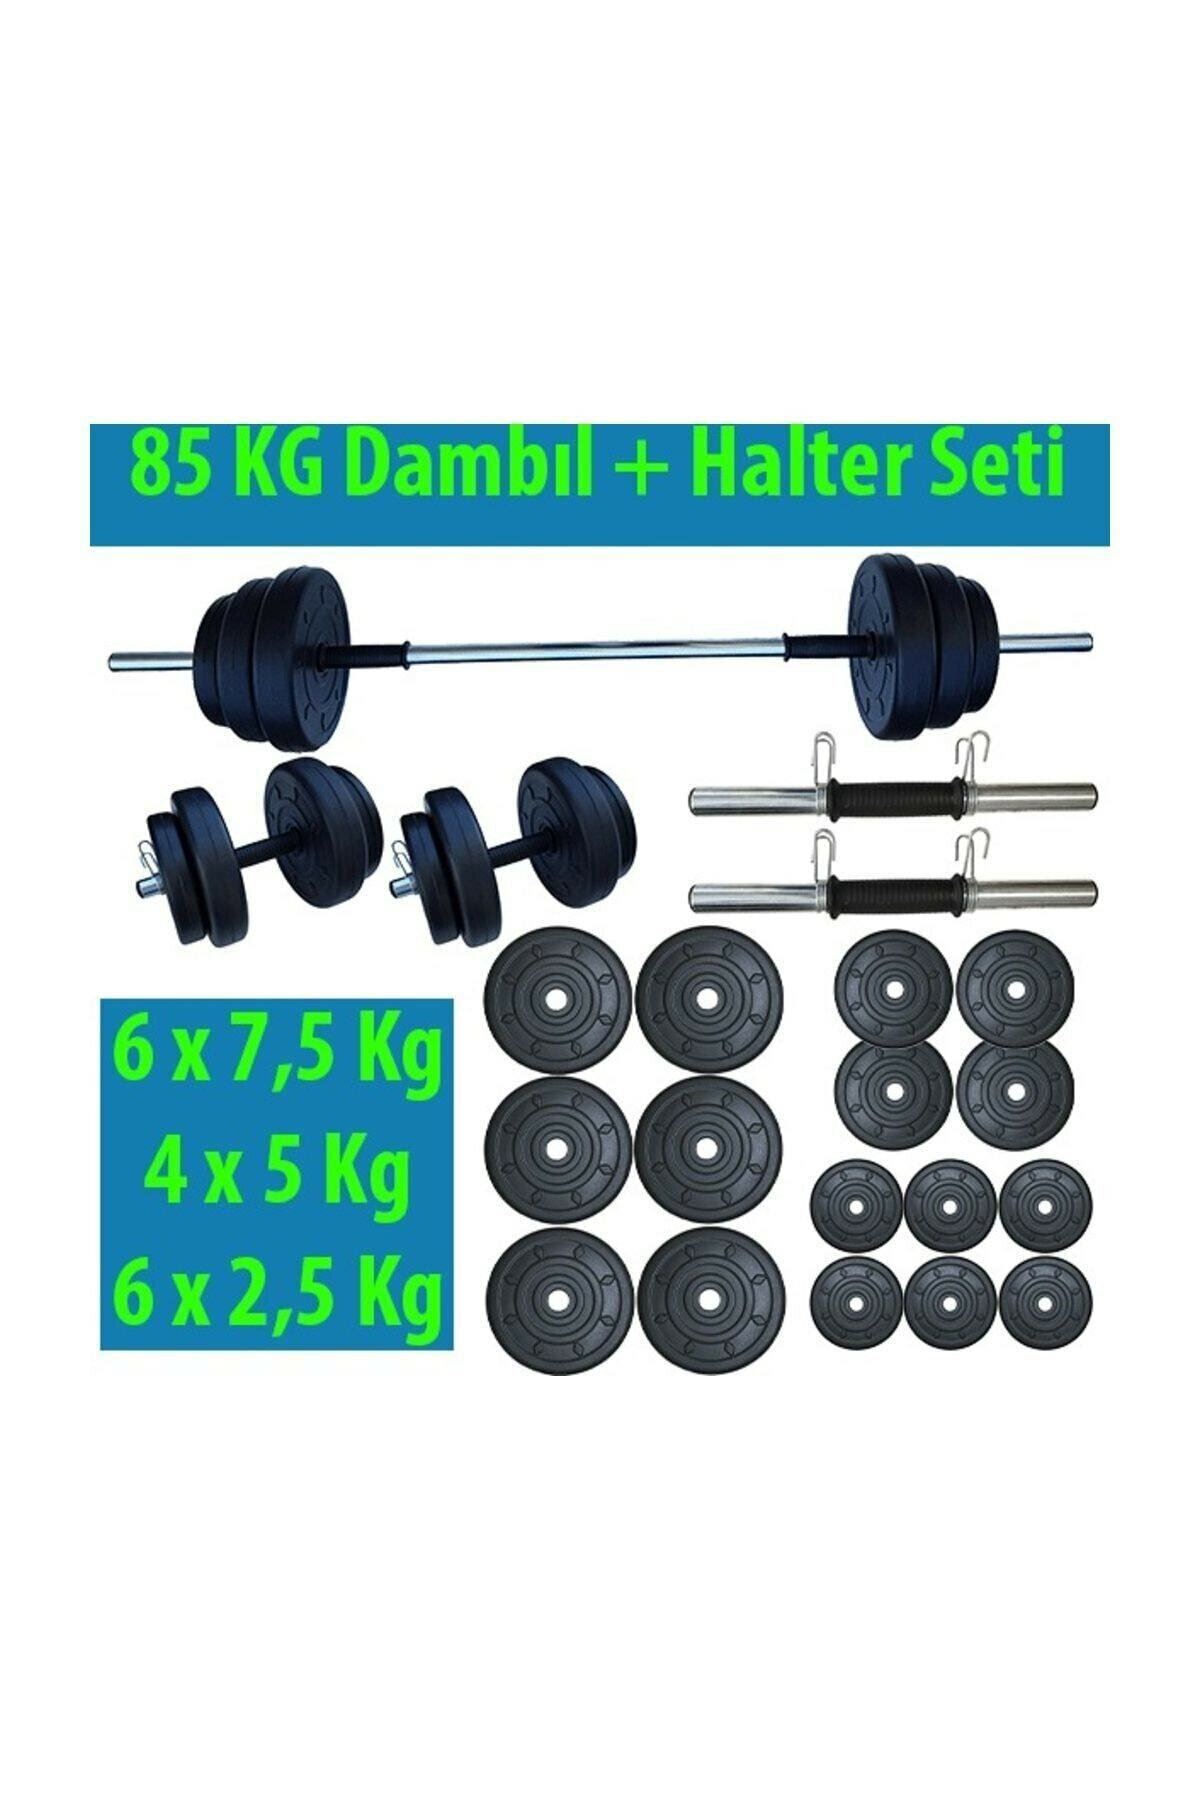 Dumbbell Set 85 KG Dumbbell Set Dumbbell Set Weight And Body Building Tool 85 Kg Dumbell Set